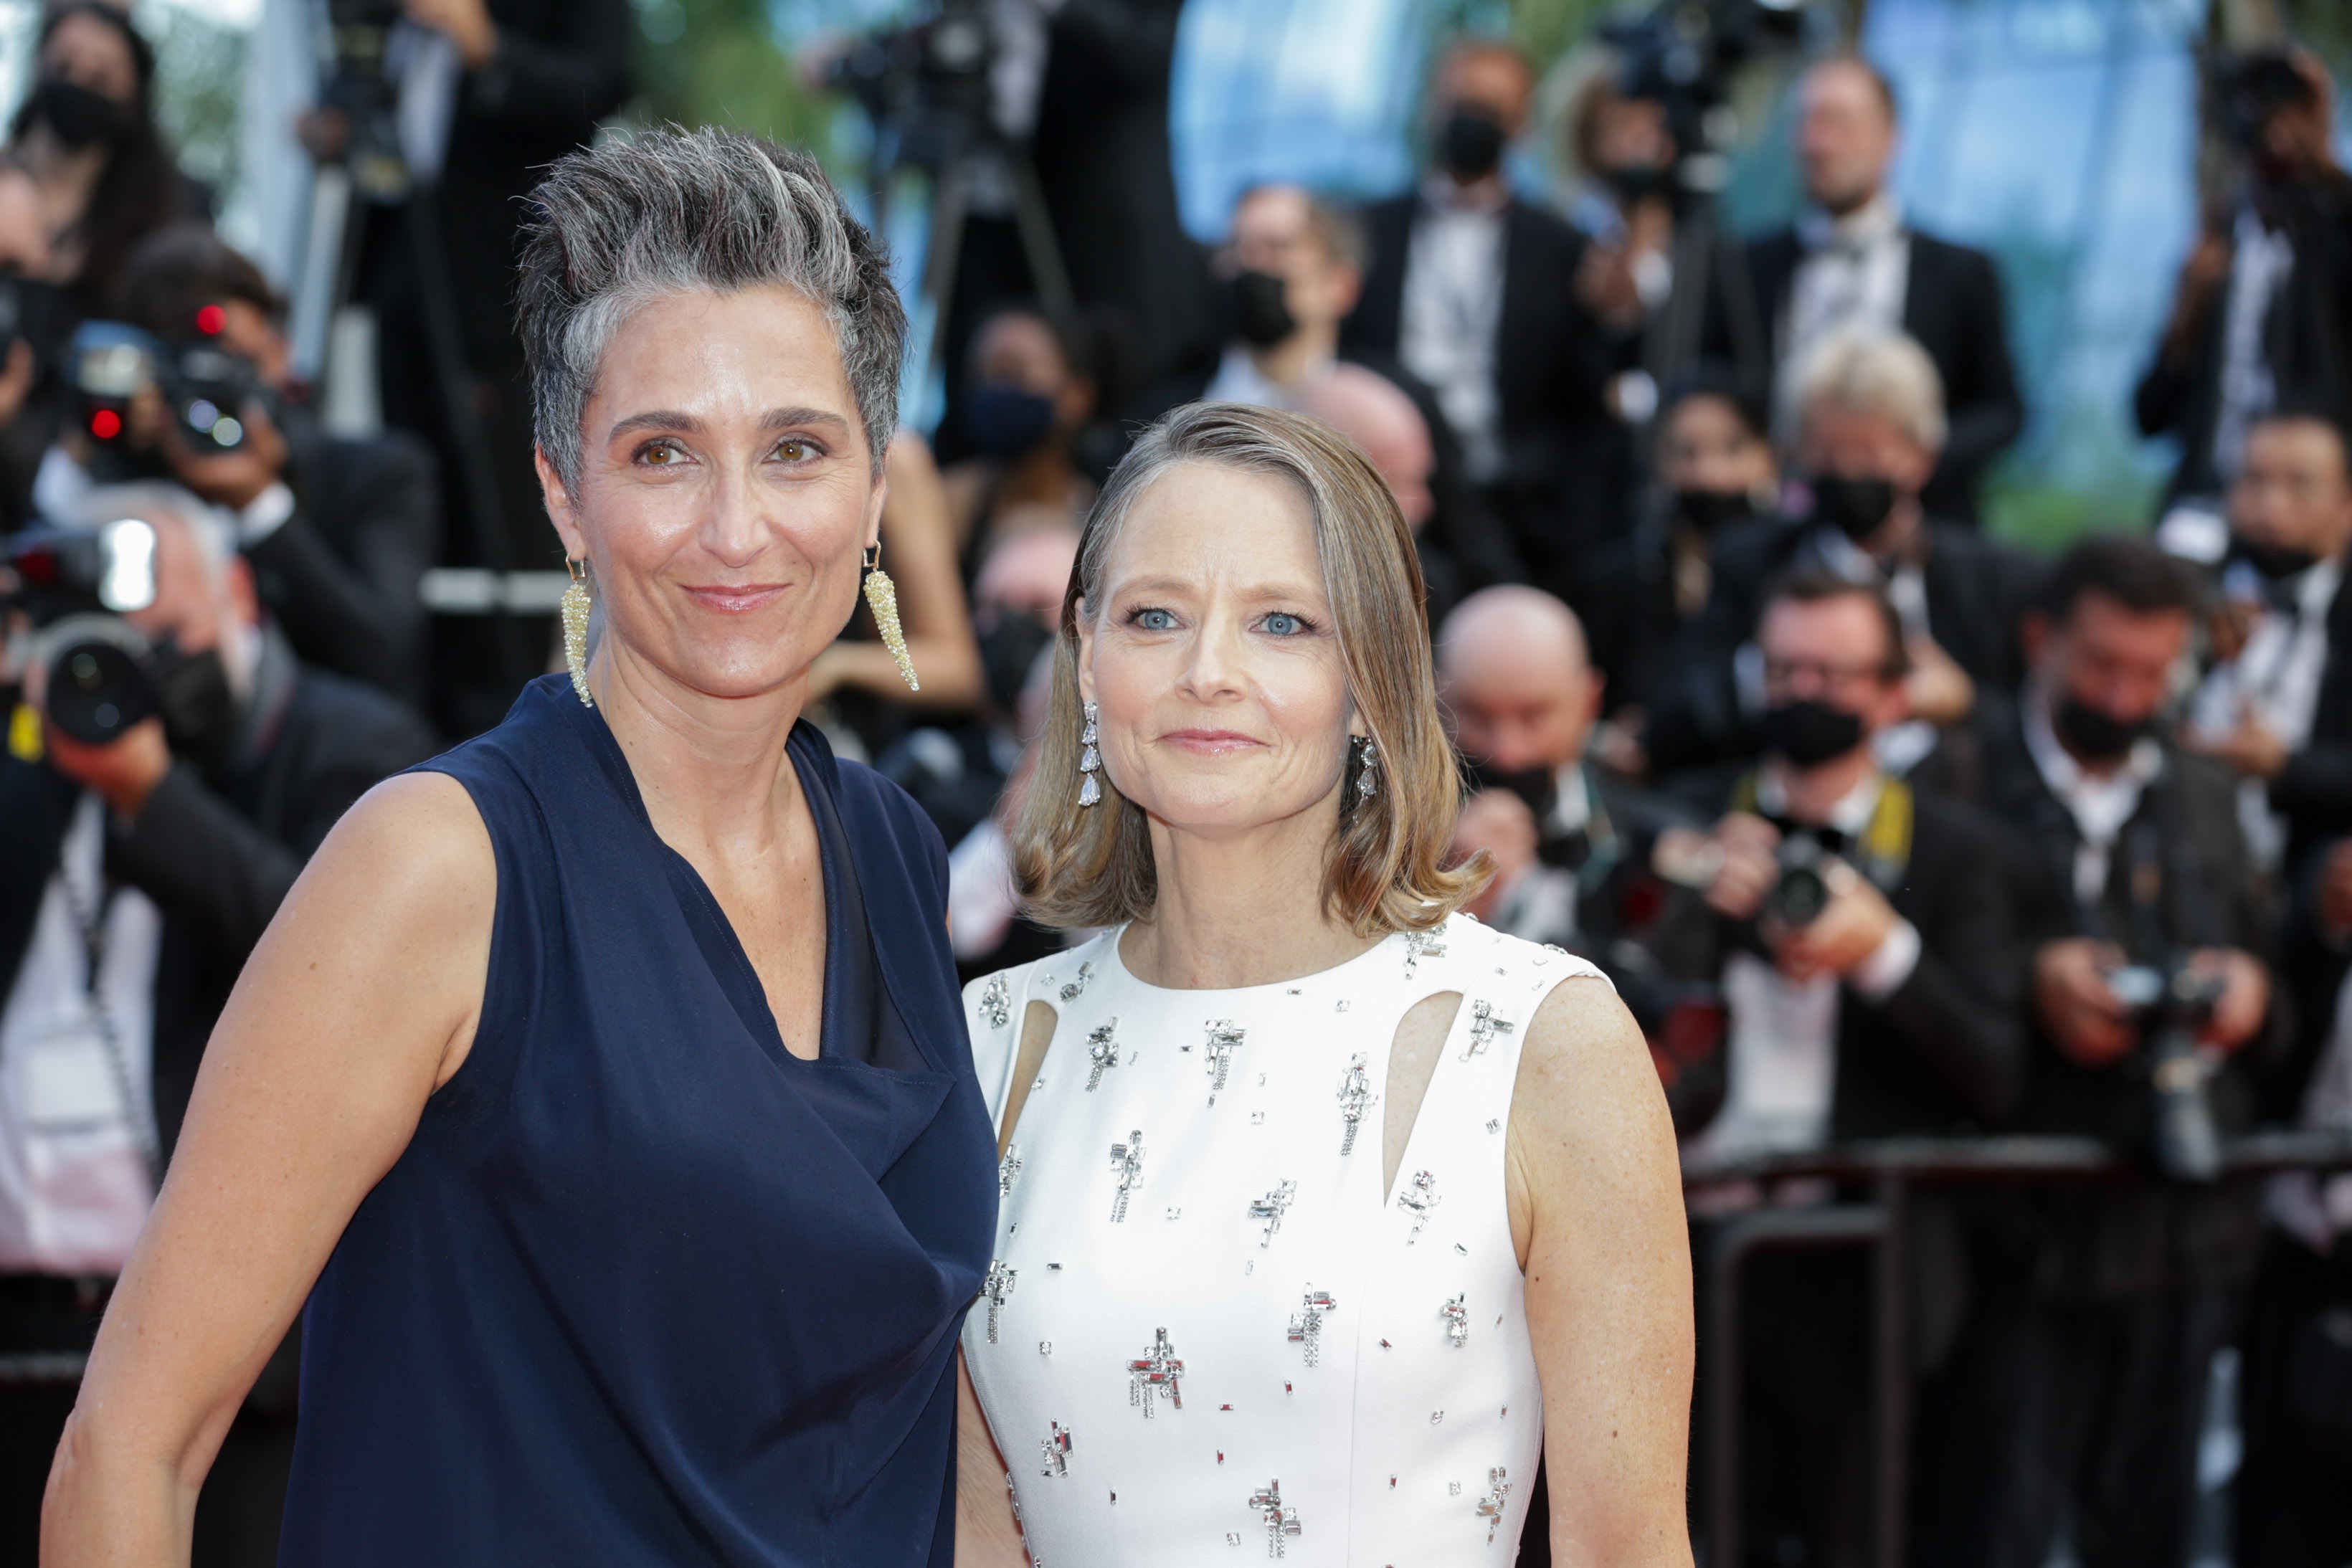 CANNES, FRANCE - JULY 06: Alexandra Hedison and Jodie Foster attend the "Annette" screening and opening ceremony during the 74th annual Cannes Film Festival on July 06, 2021 in Cannes, France. (Photo by Stephane Cardinale - Corbis/Corbis via Getty Images) (Foto: Corbis via Getty Images)